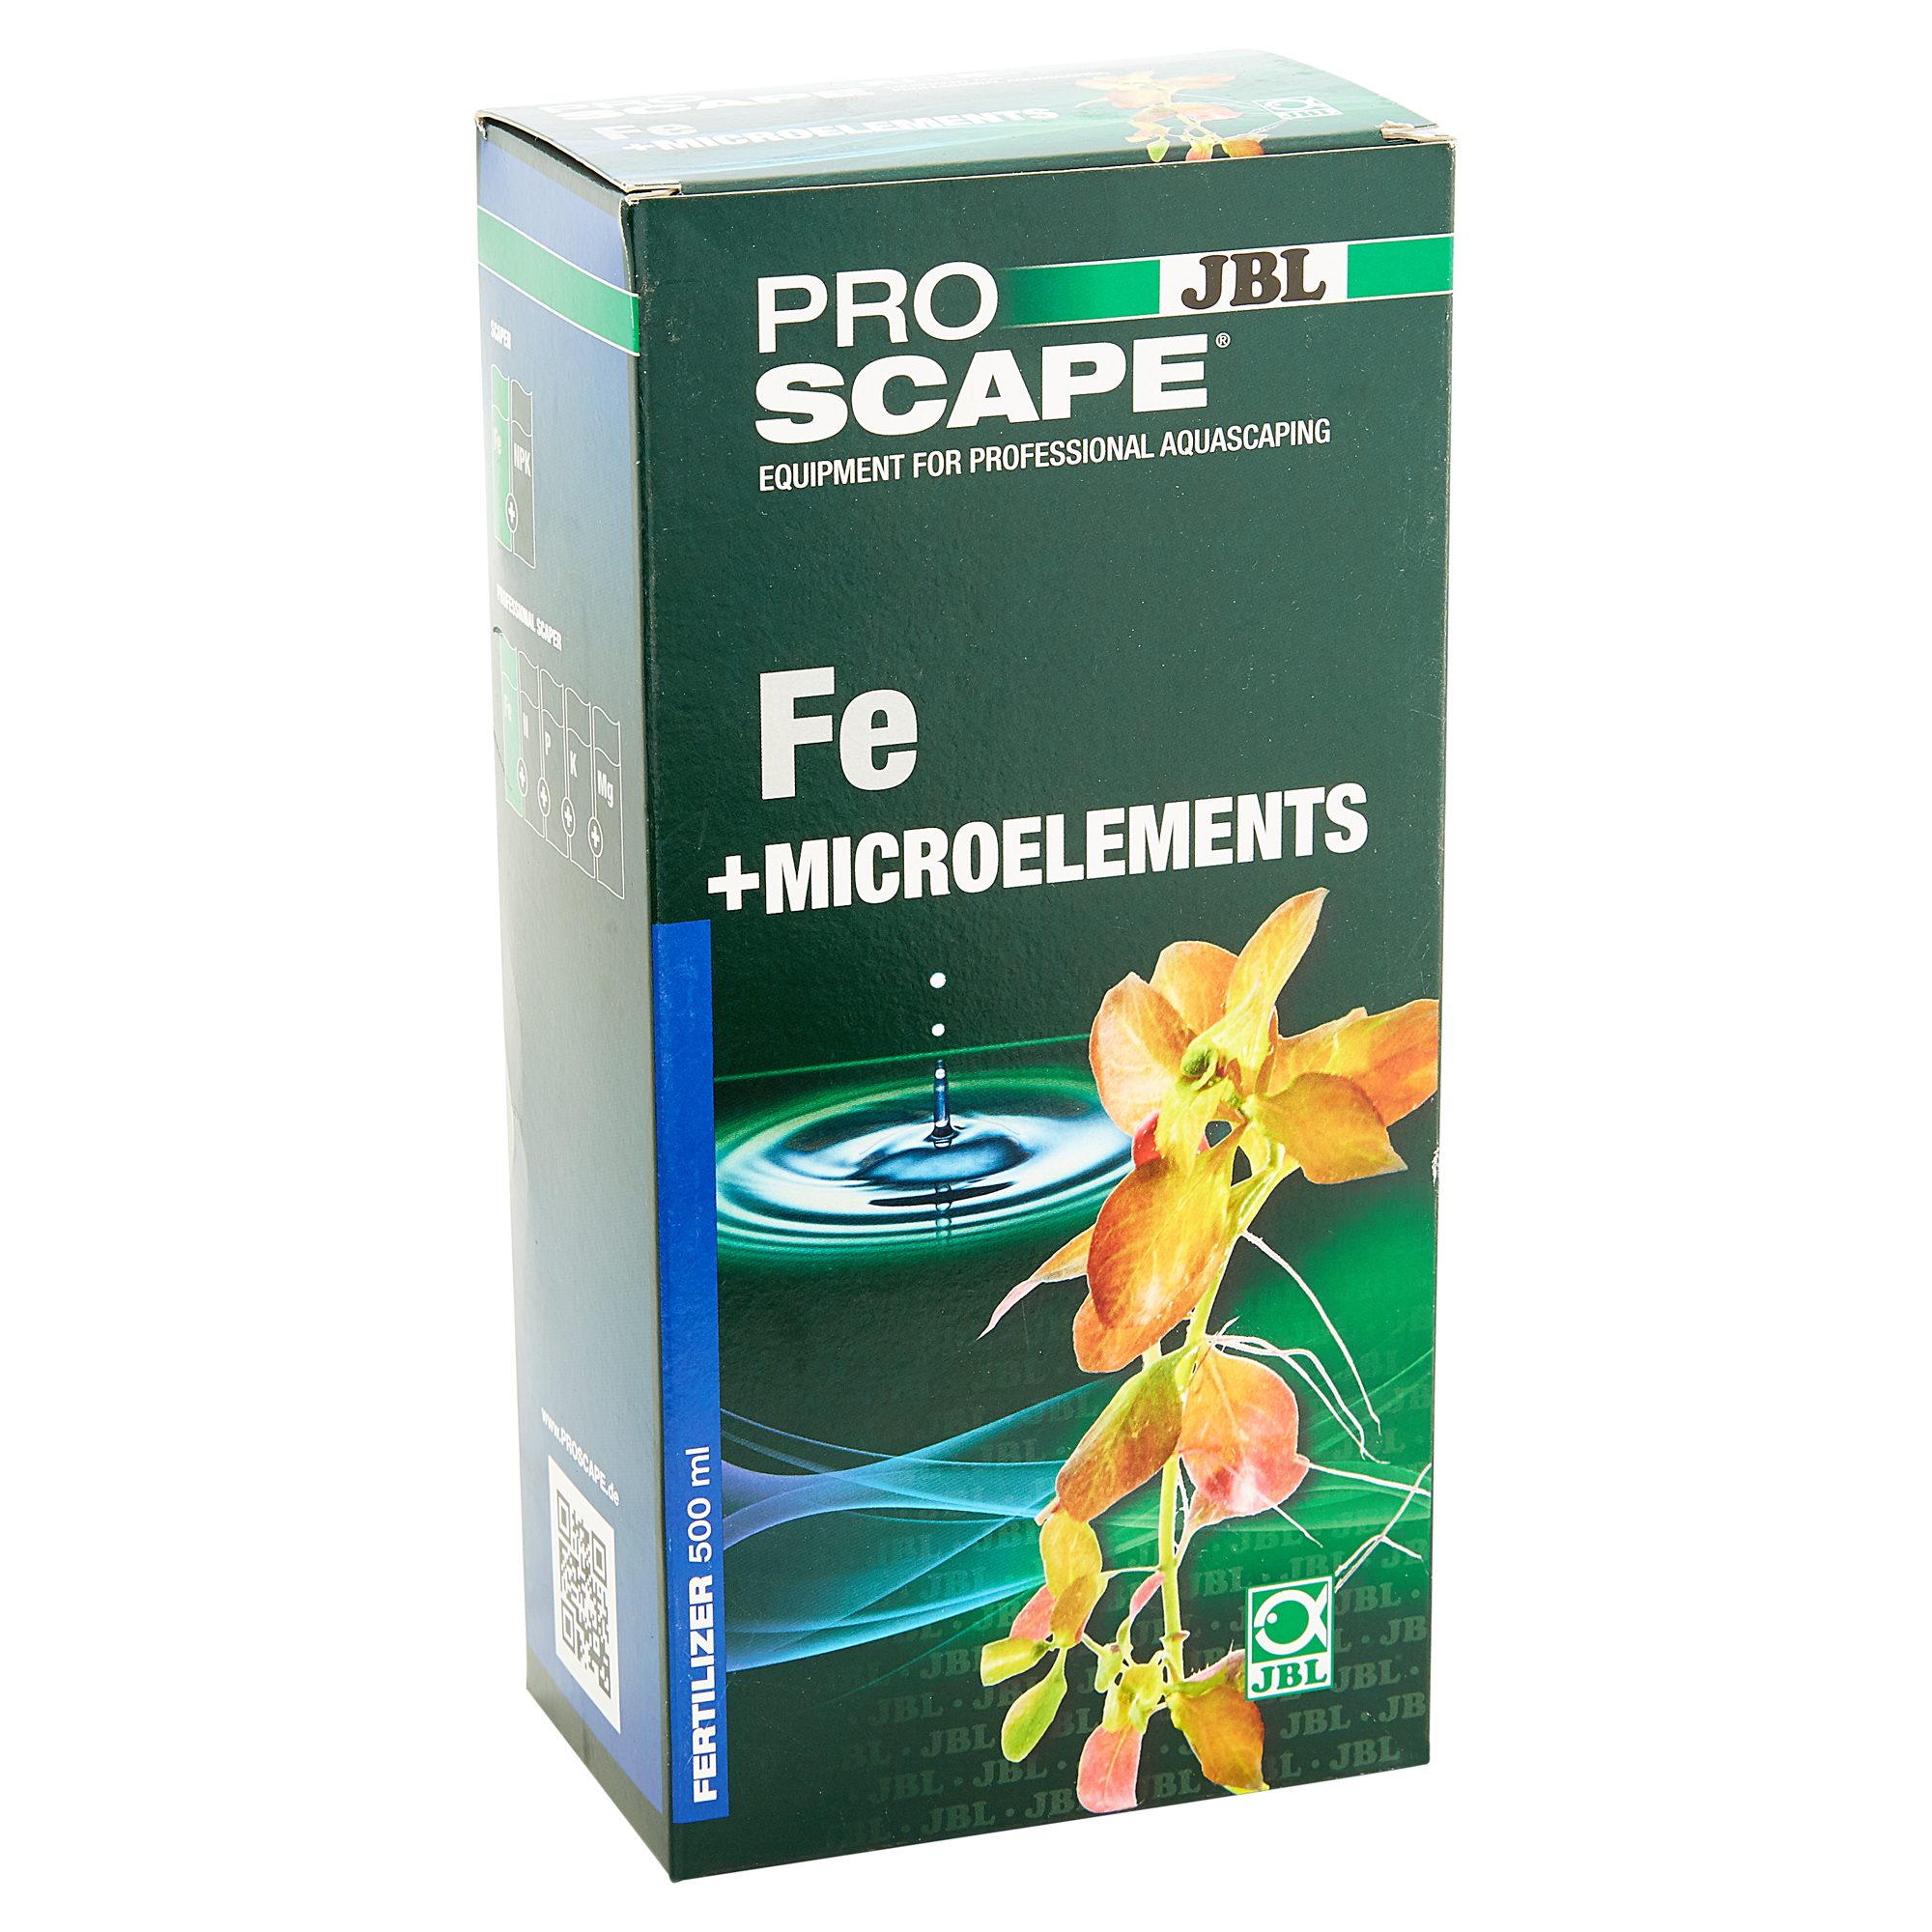 Pflanzendünger "ProScape" Fe + Microelements 500 ml + product picture